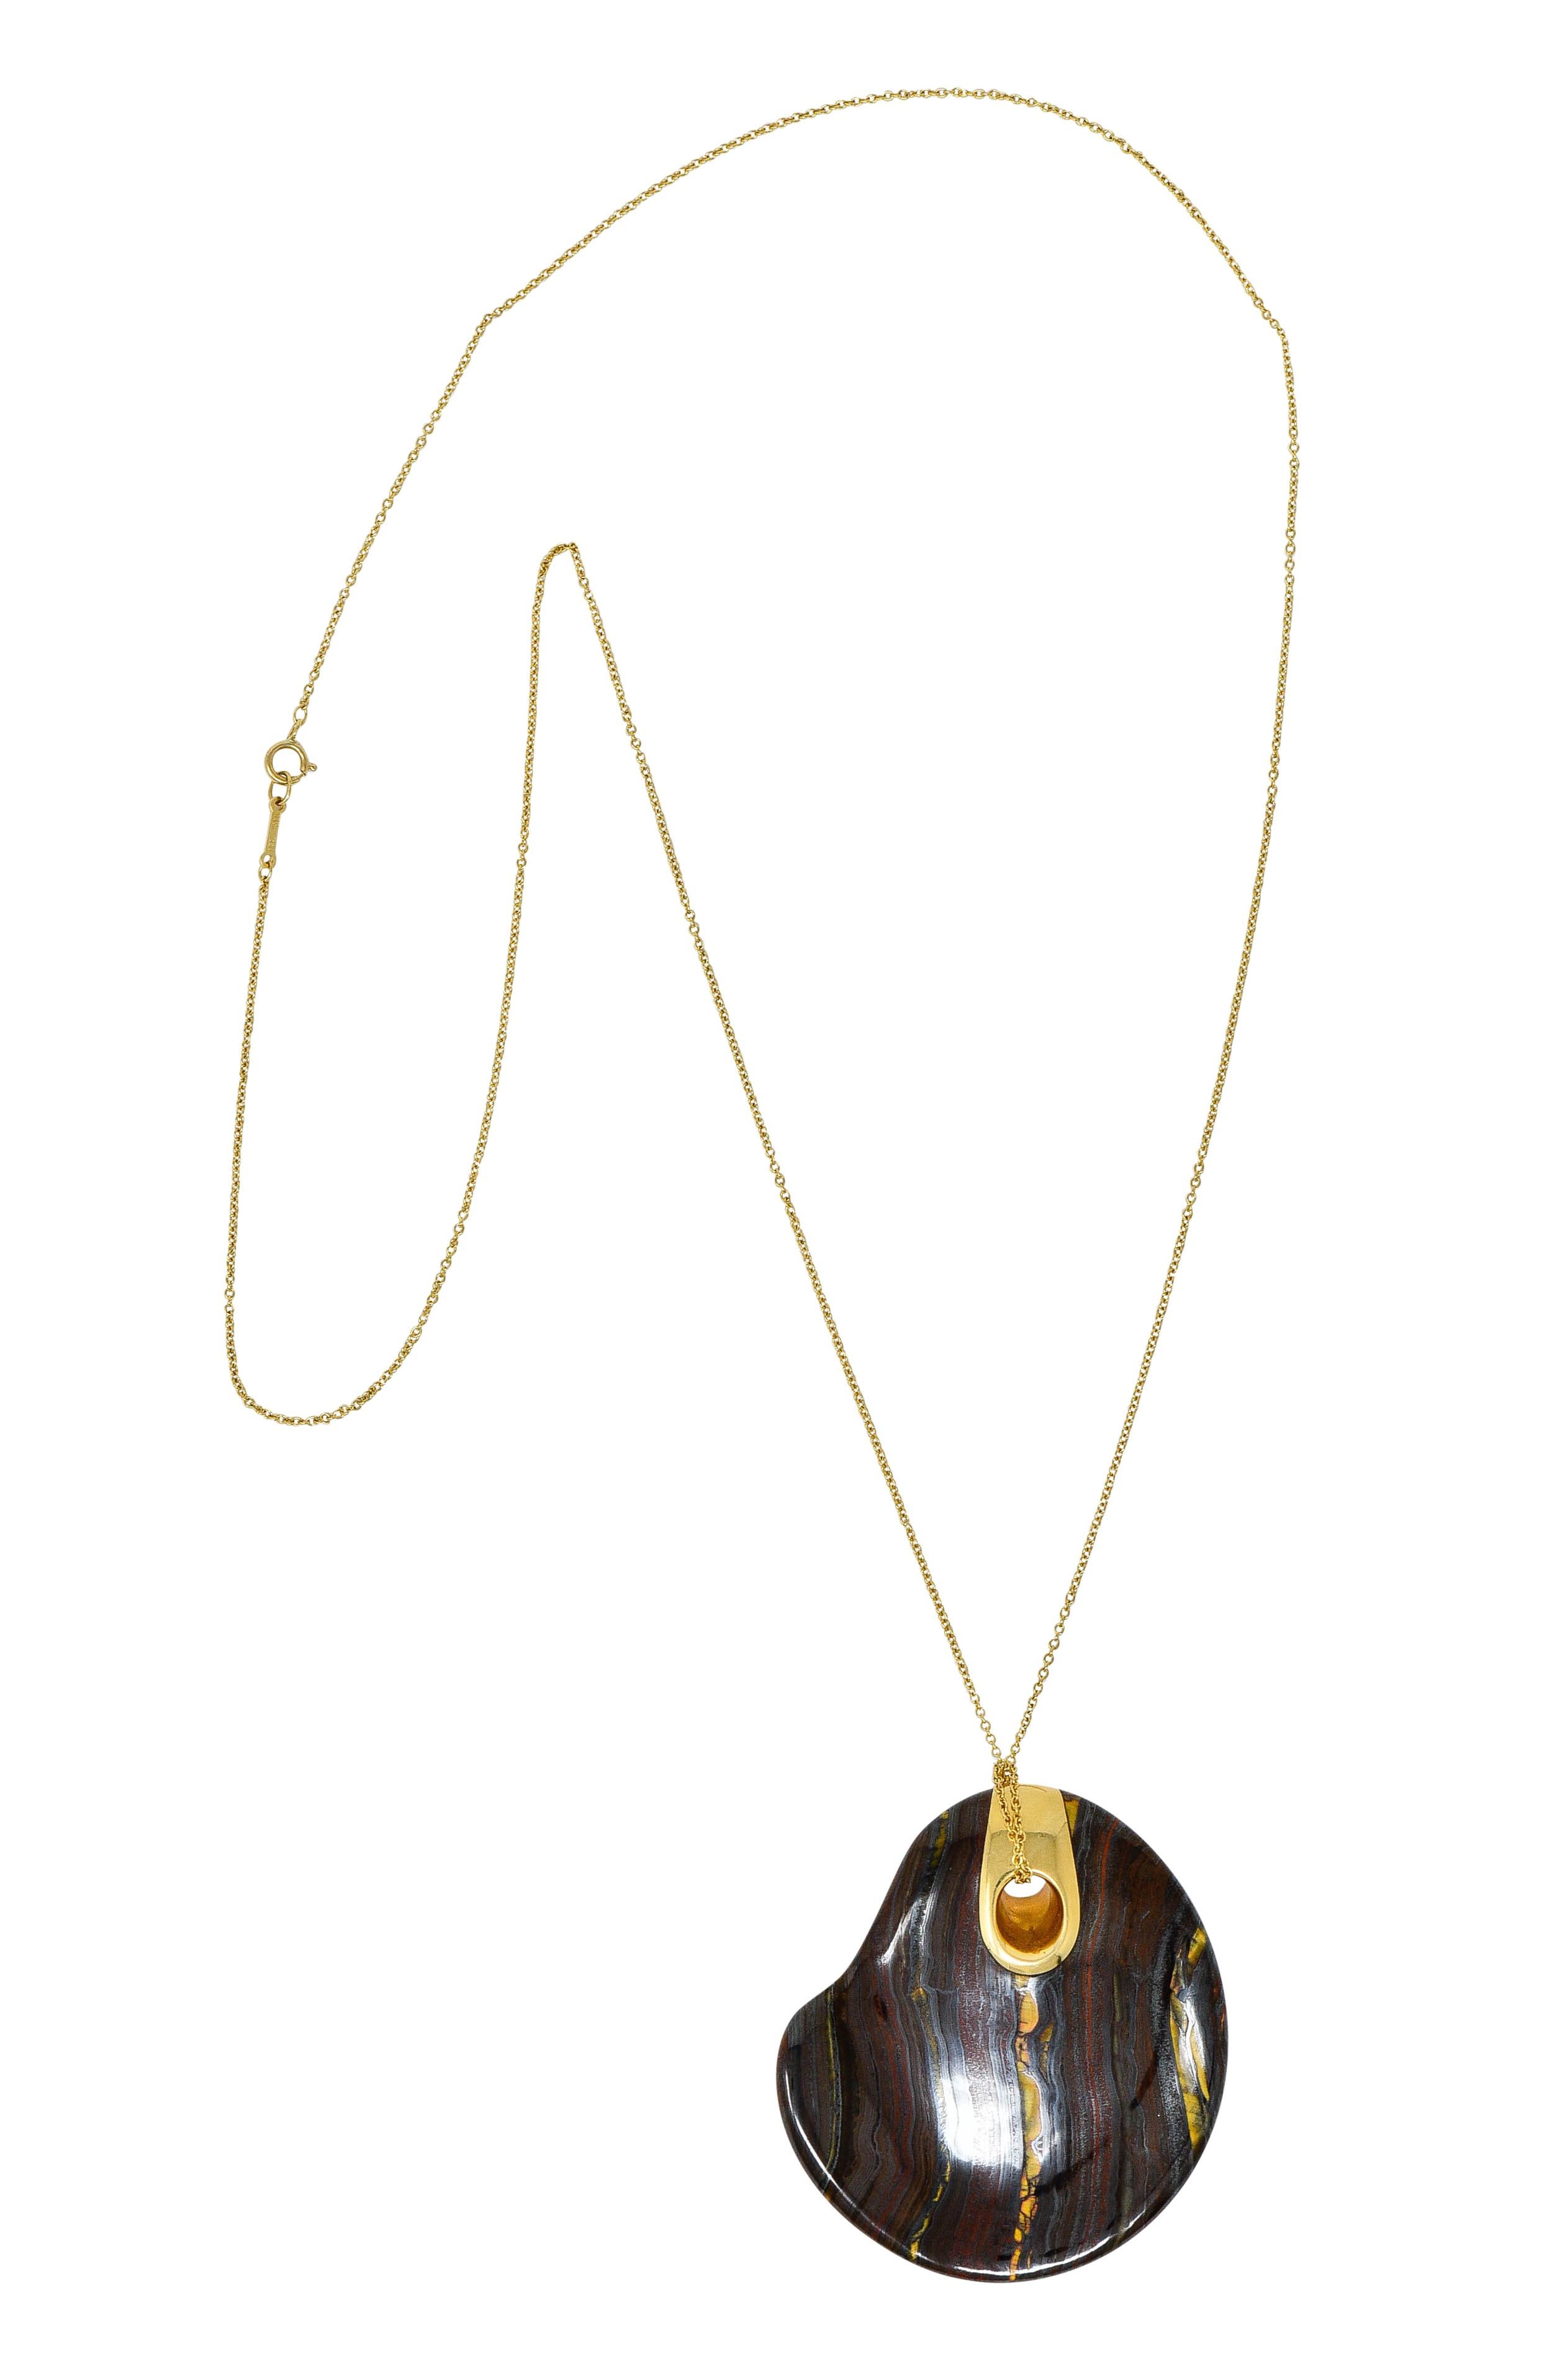 Pendant is comprised of tiger iron designed as a touchstone with an organic form and a concave center

Tiger iron is a striped and opaque aggregate found in Western Australia that features tiger's eye quartz, red jasper, and hematite

Topped by an